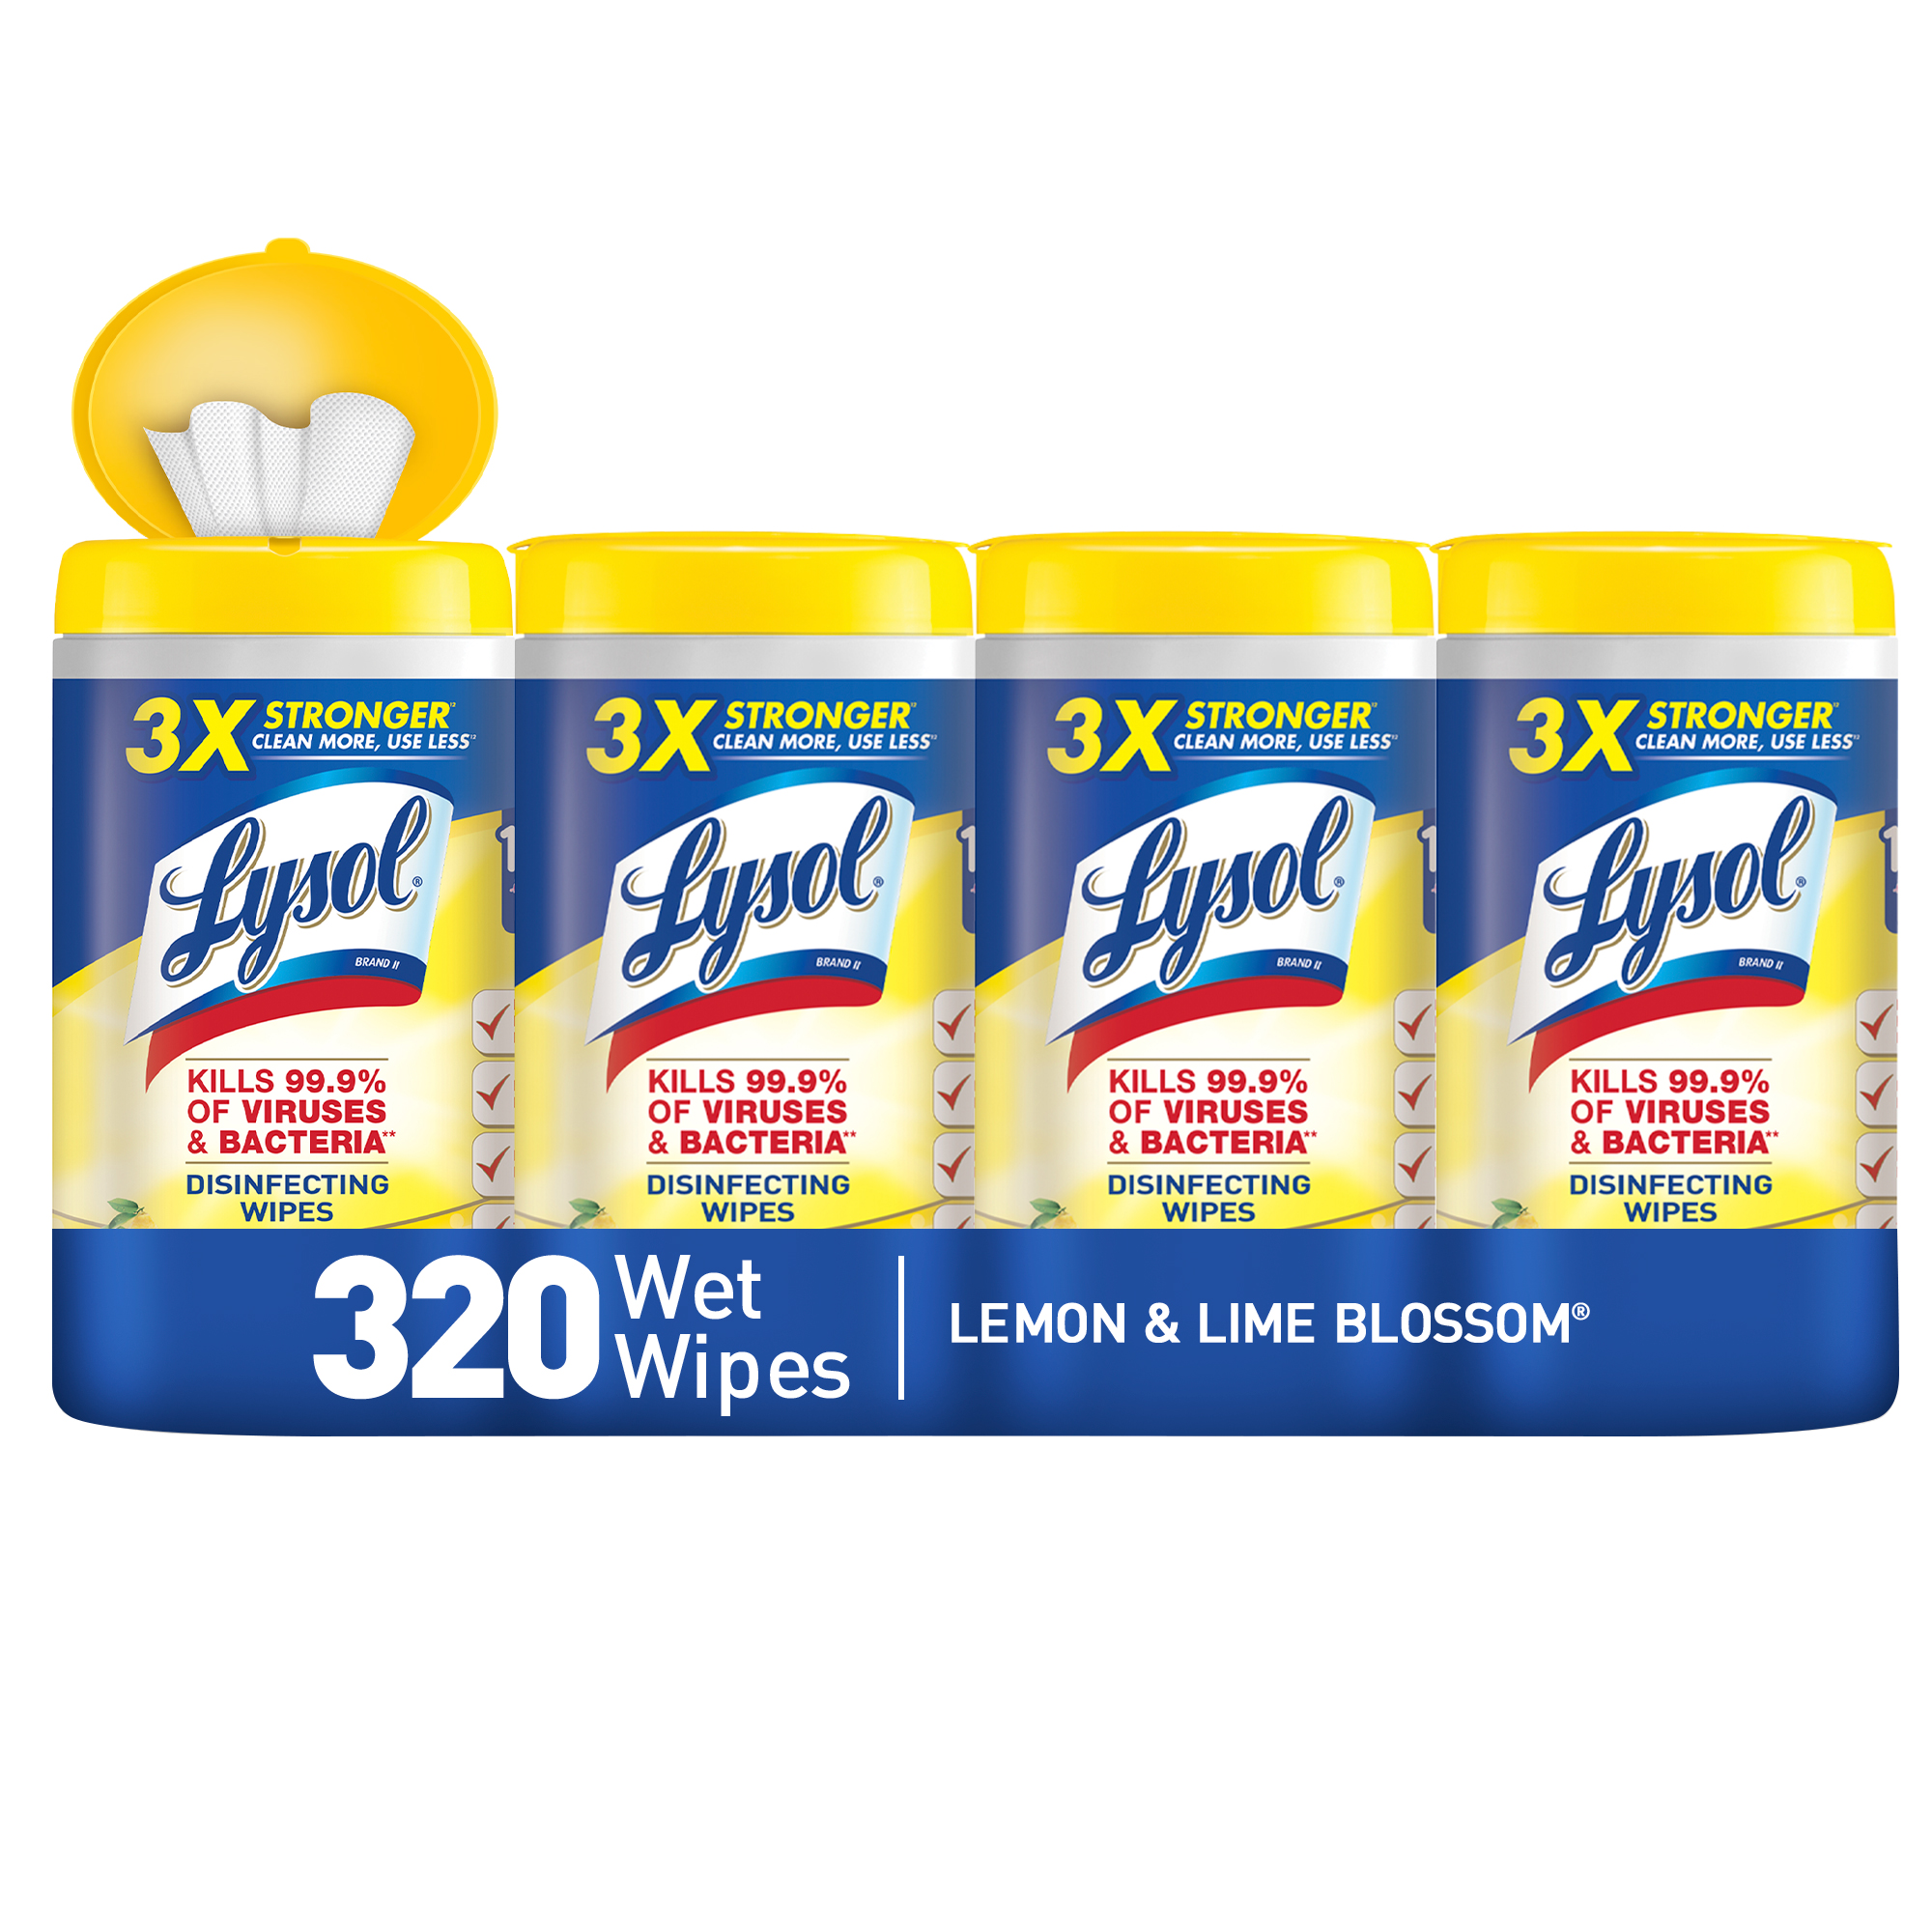 Lysol Disinfecting Wipes, Lemon & Lime Blossom, 320ct (4x80ct) $11.52 (Stock locations may vary)